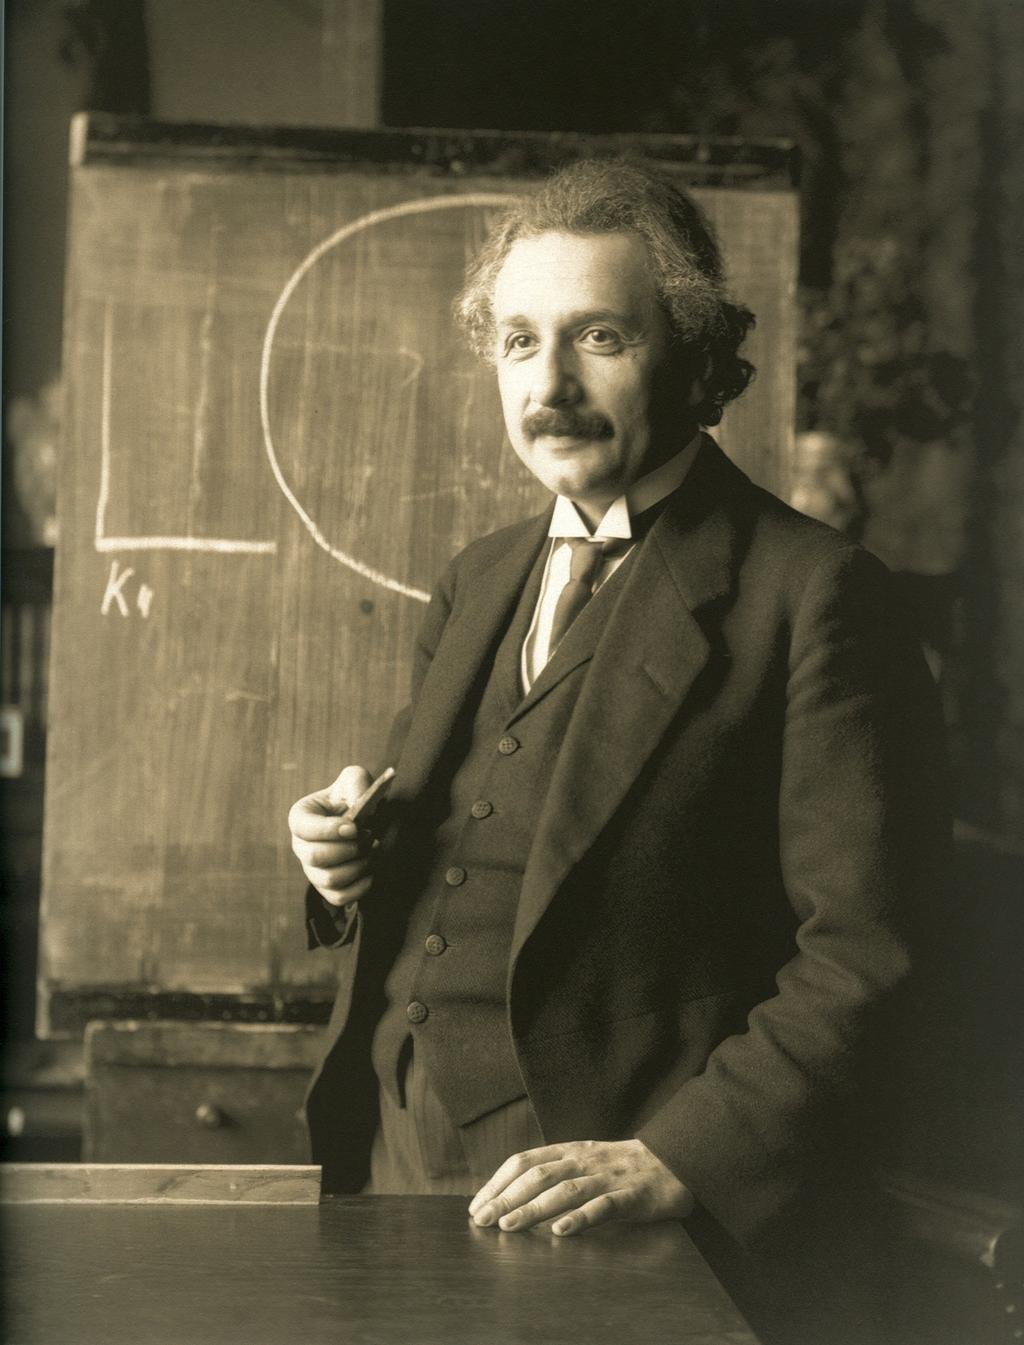 A New Revolution in Science Impact of Albert Einstein s Theory of Relativity Startling new ideas on space, time, energy and matter.